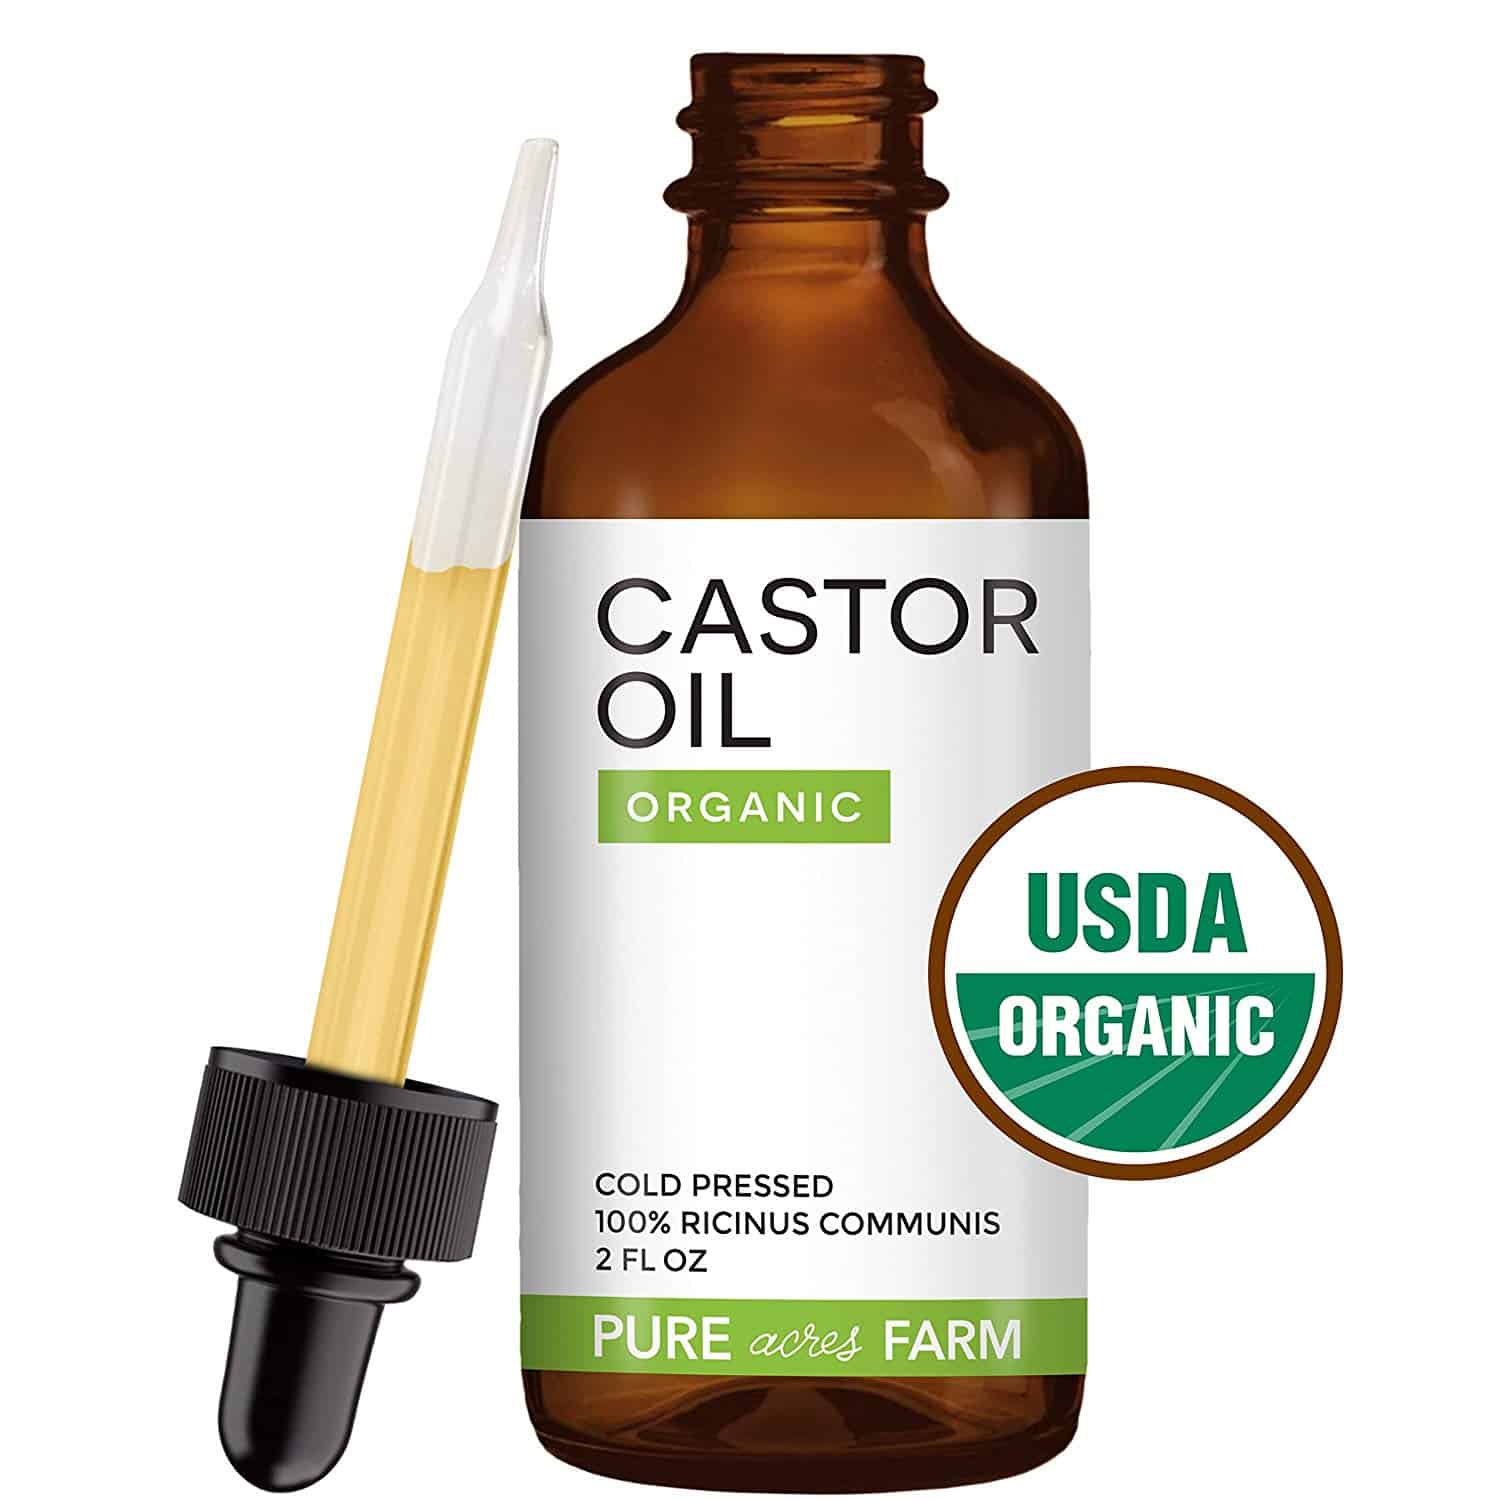 10 Best Castor Oils For Hair Growth and Dandruff Issues